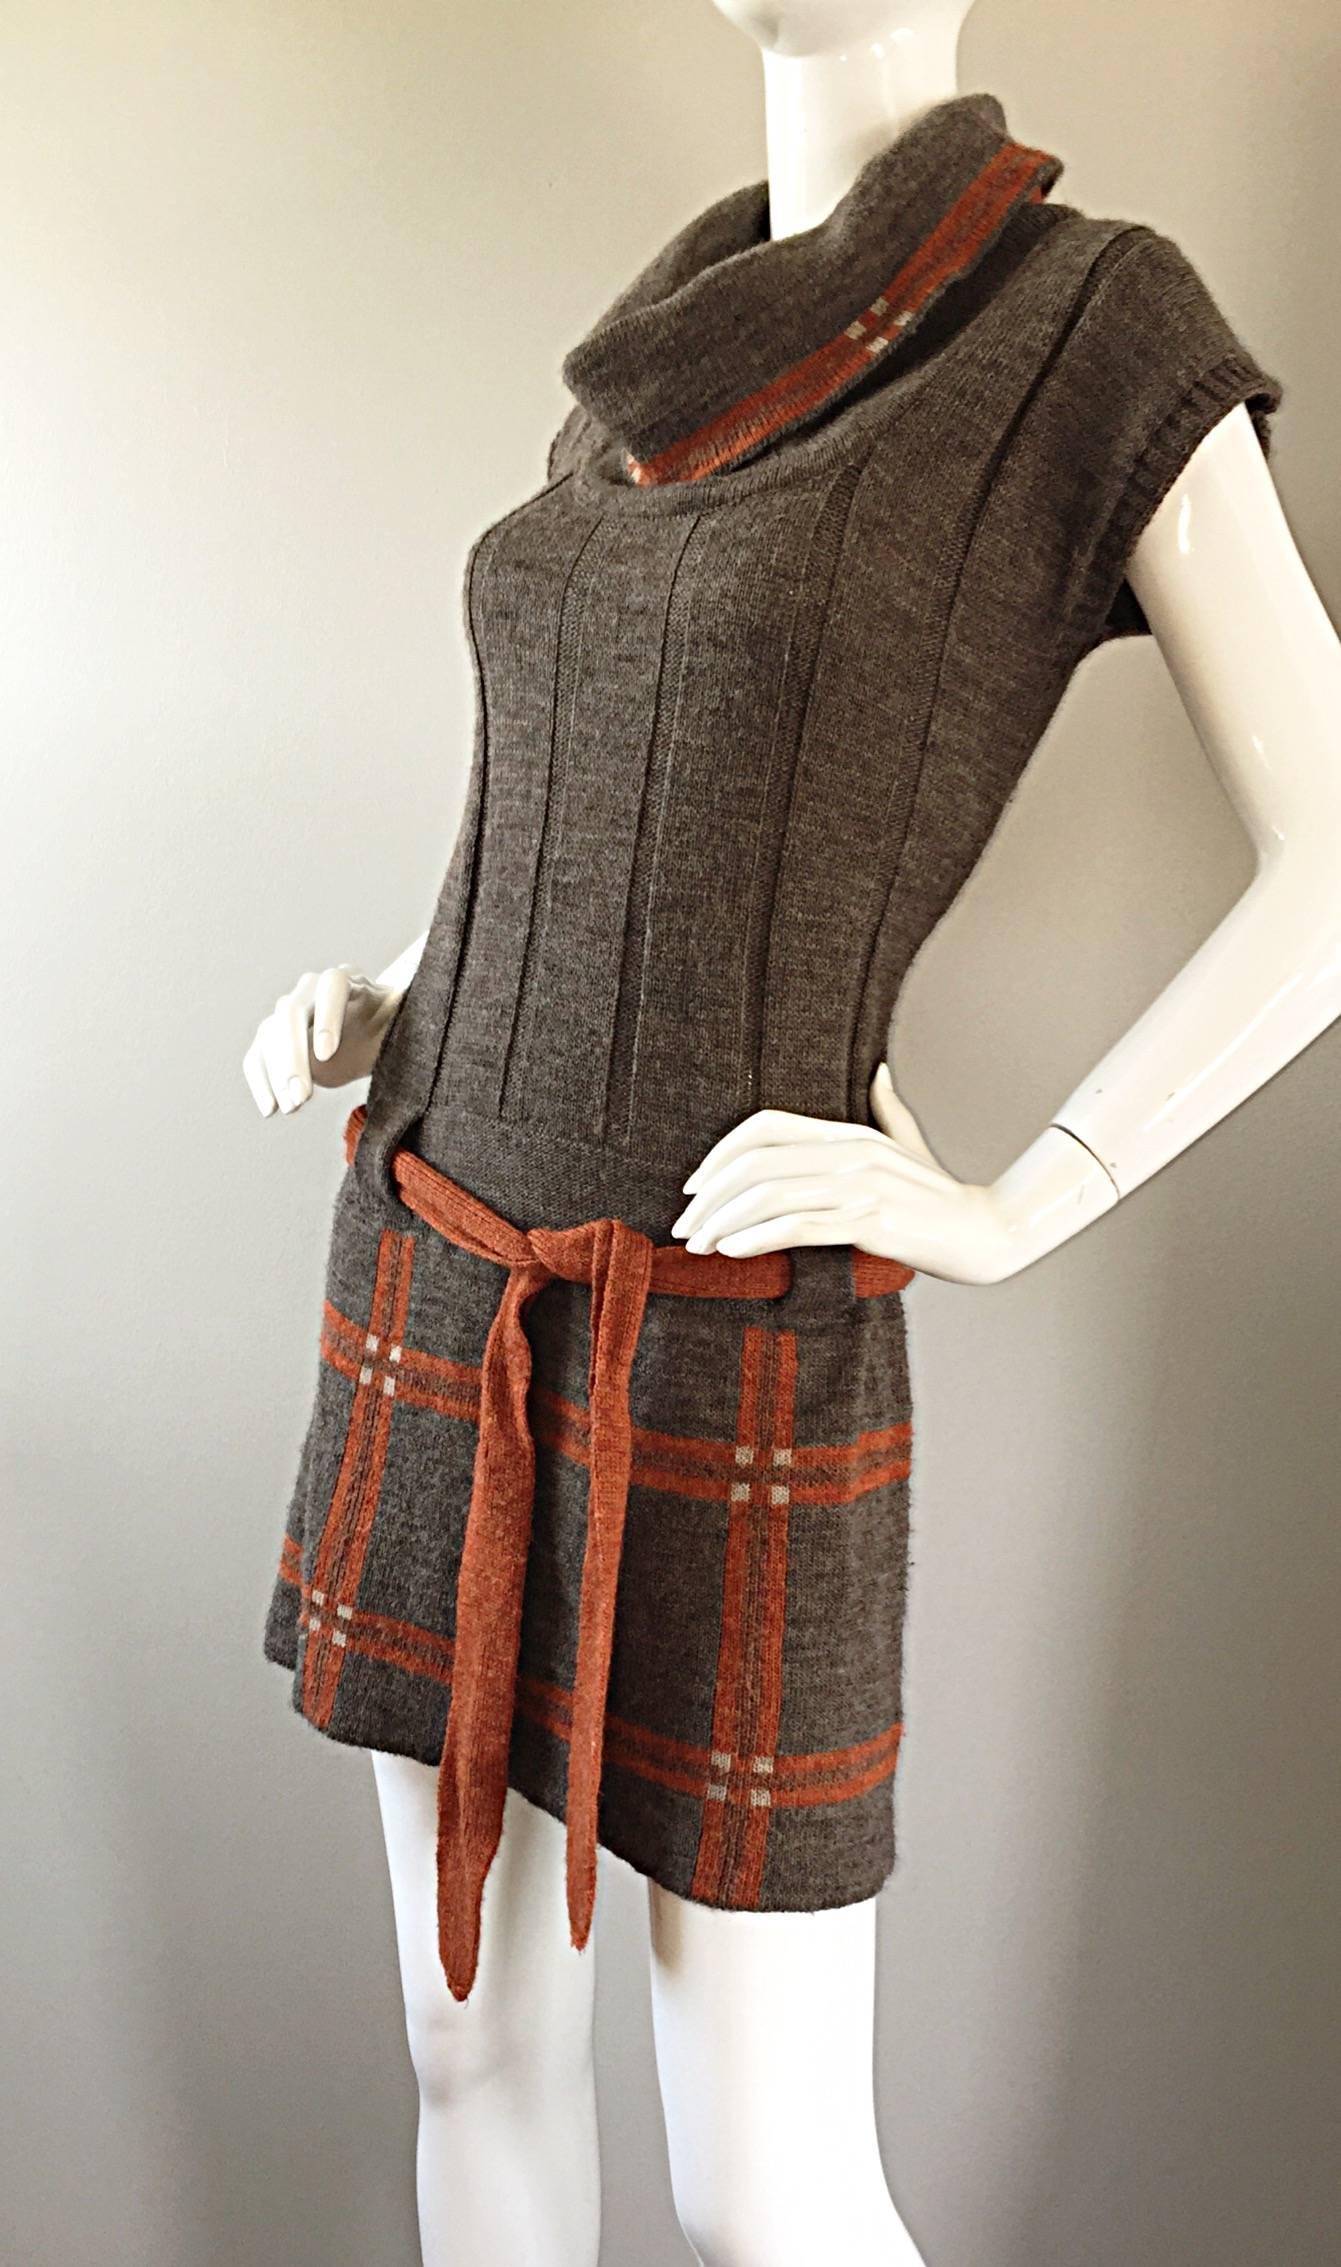 Women's Vintage Cocogio Brown + Grey + Orange Cowl Neck Belted Plaid Sweater Dress